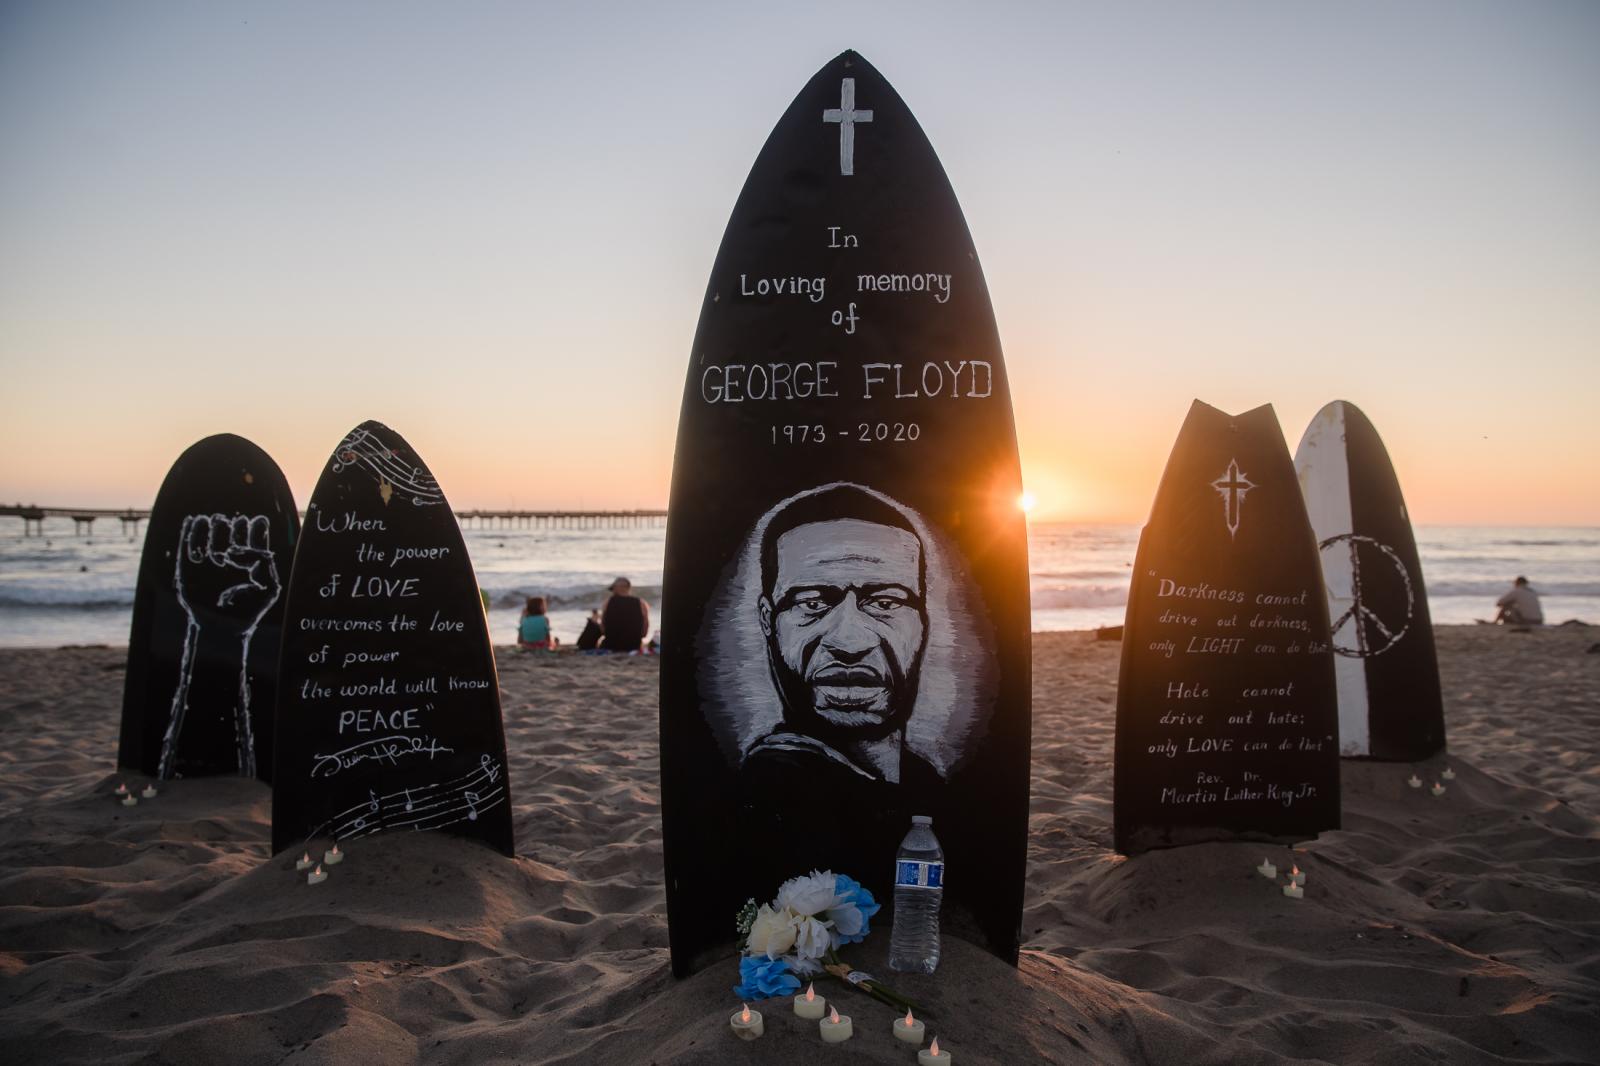 Image from United States - A makeshift memorial for George Floyd in Ocean Beach,...